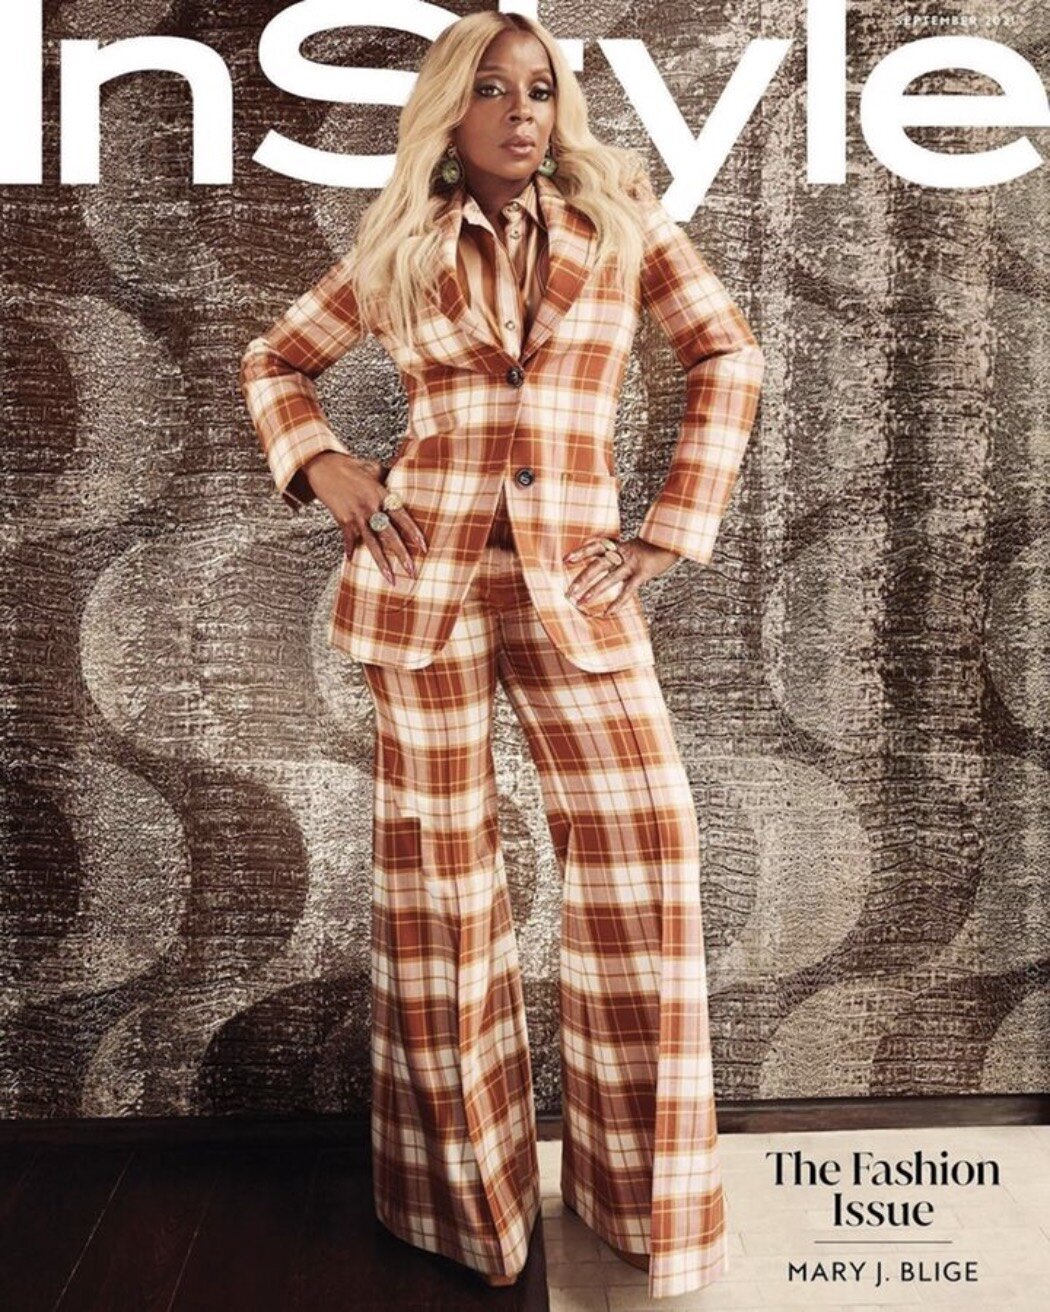 MJB_instyle_cover_small.jpg